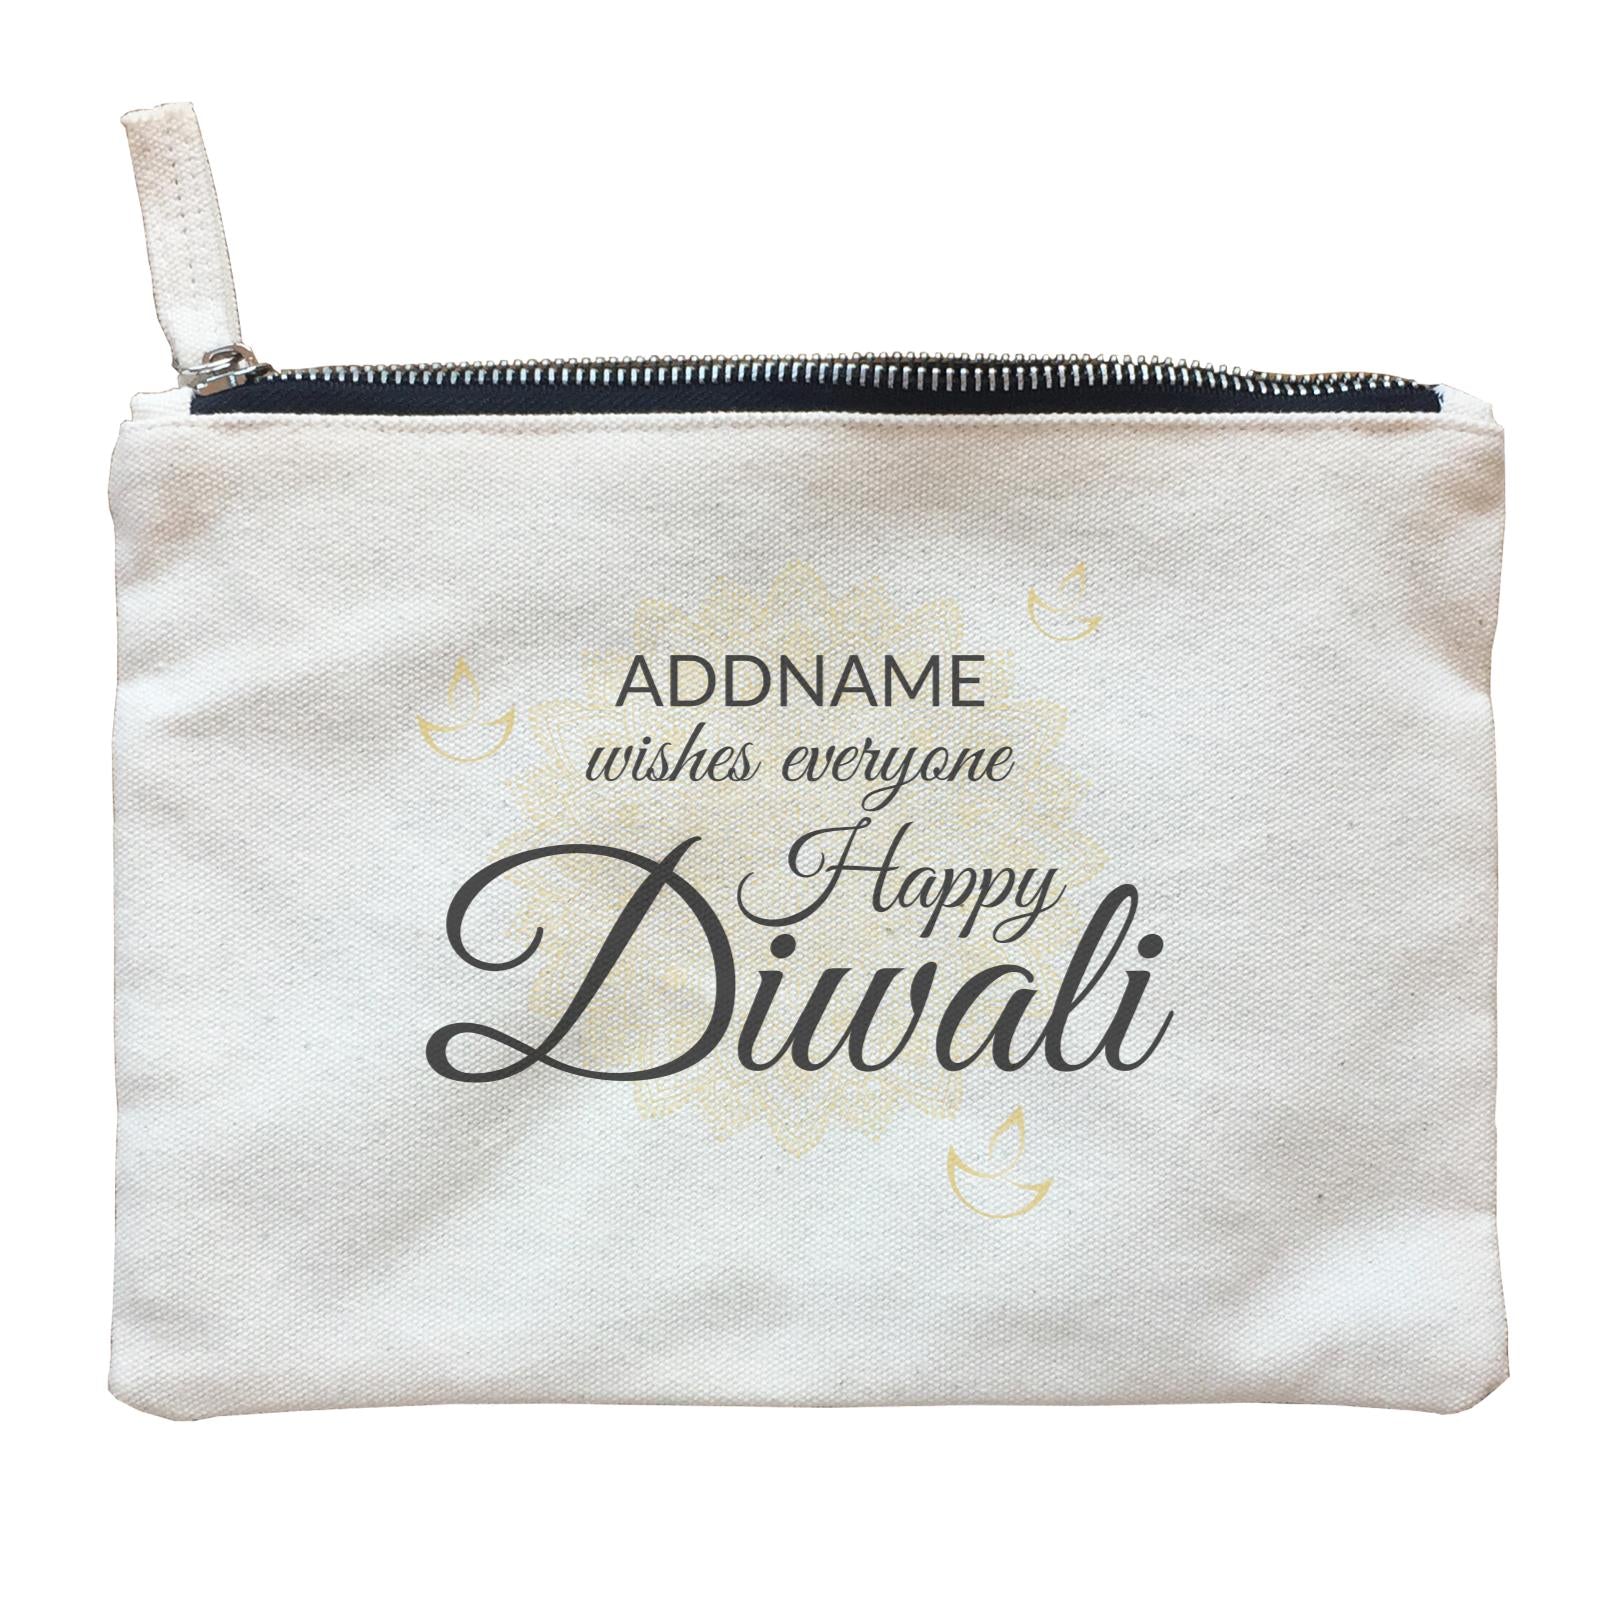 Addname Wishes Everyone Happy Diwali with Mandala Zipper Pouch